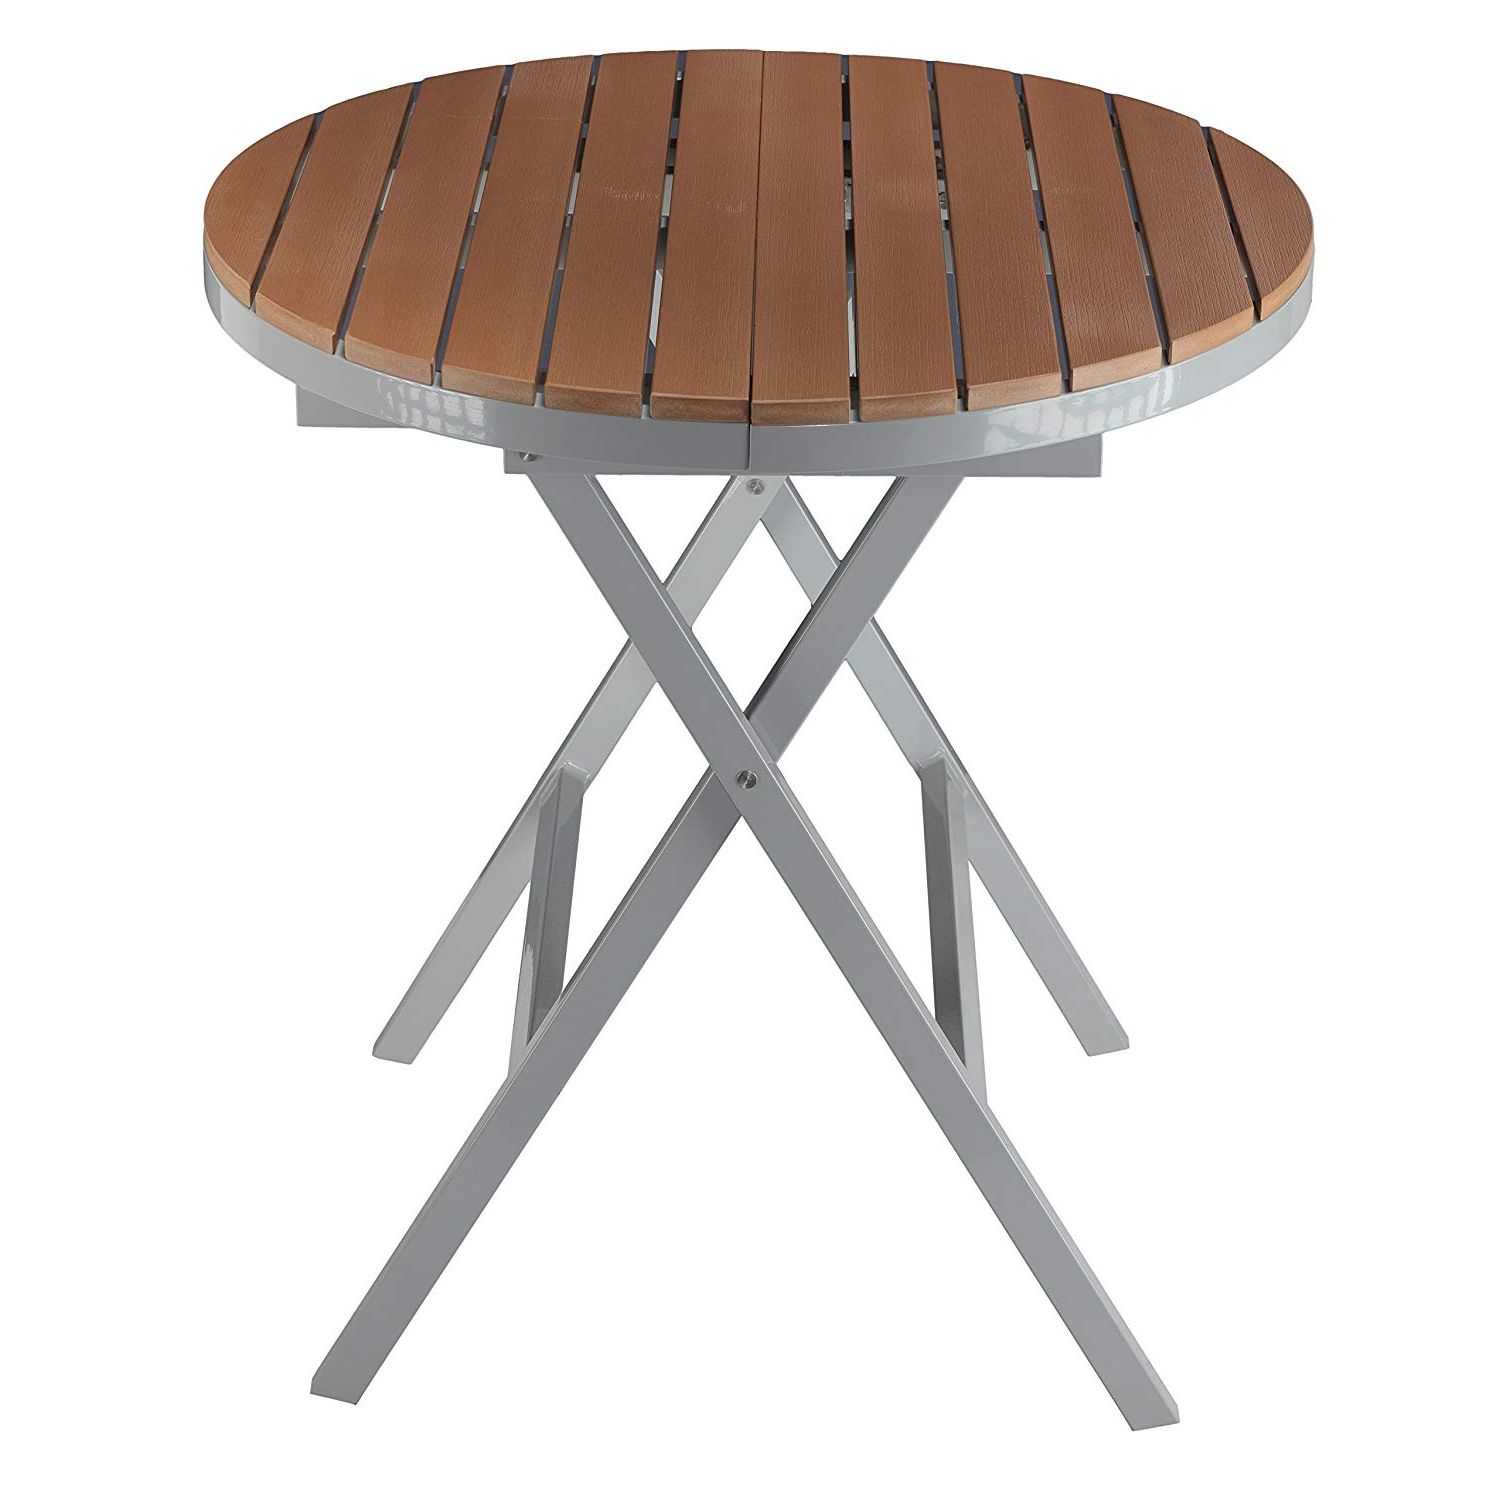 Most Popular Cortesi Home Avery Aluminum Outdoor Round Folding Table In Inside Avery Round Dining Tables (View 12 of 25)